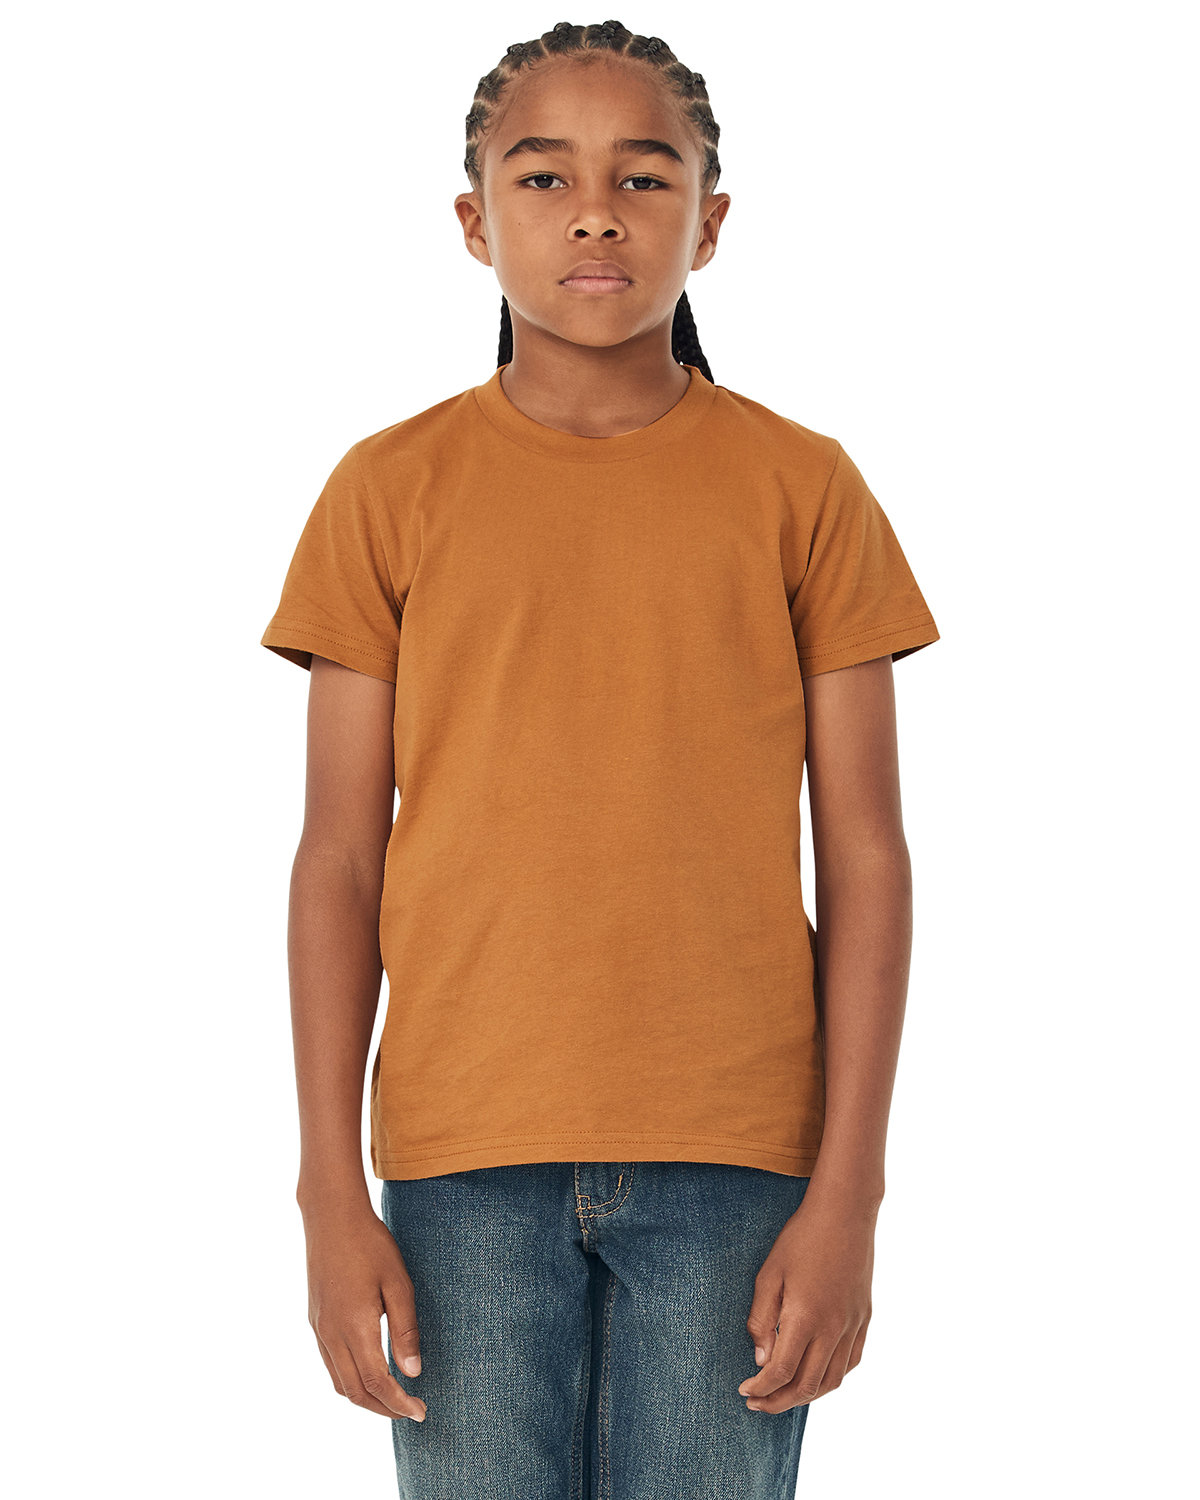 Bella + Canvas Youth Jersey T-Shirt toast 